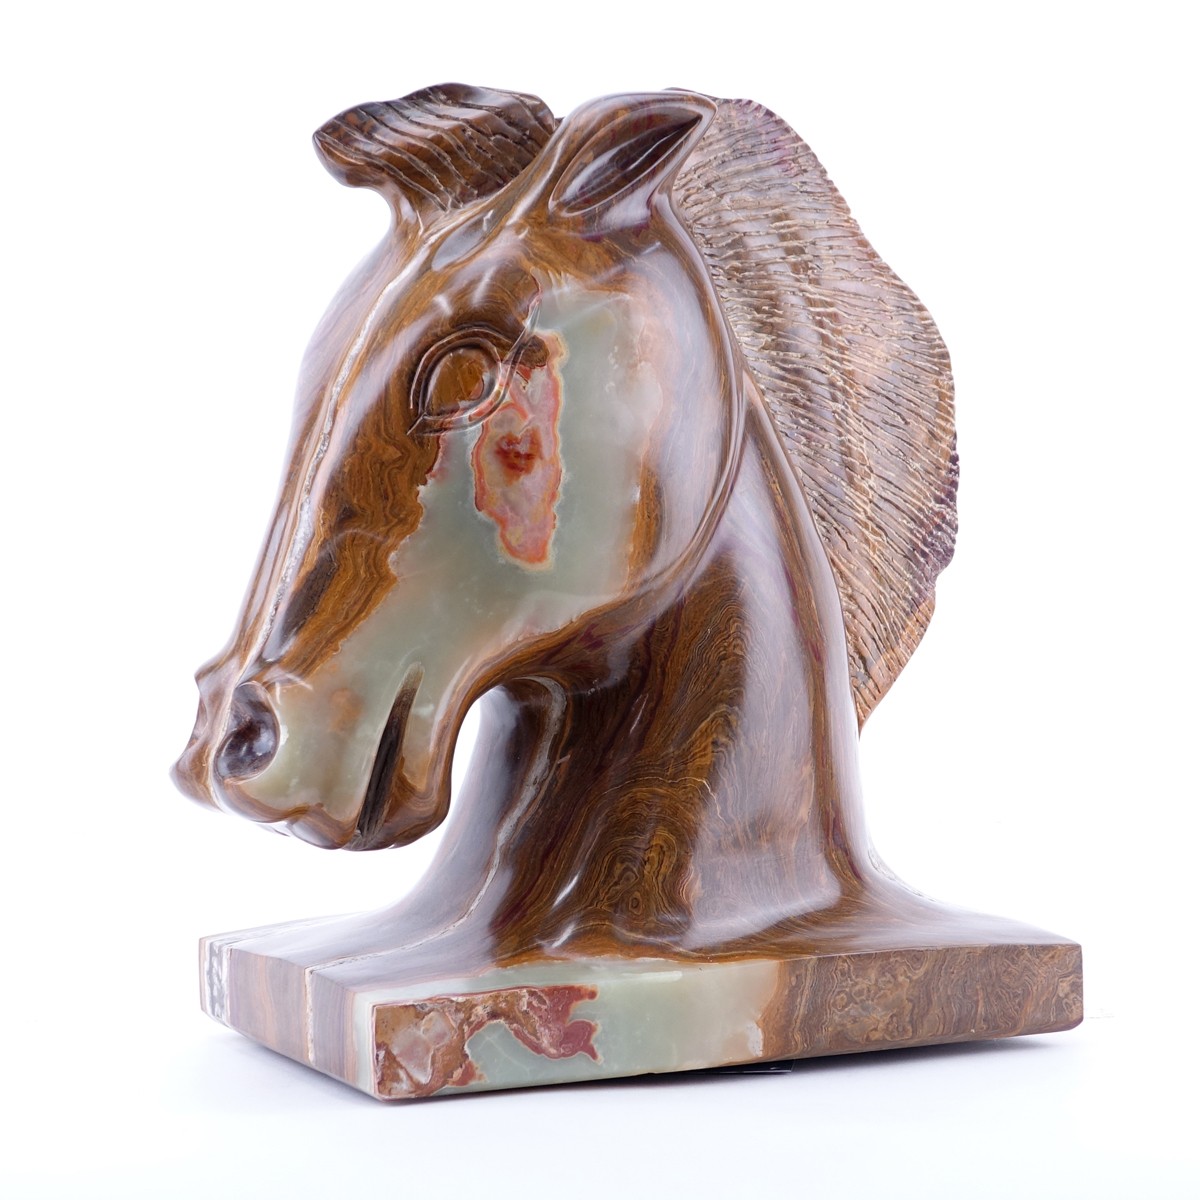 Large Carved Onyx Horse Head Sculpture Signed Bernie M. Rotating platform attached to base.